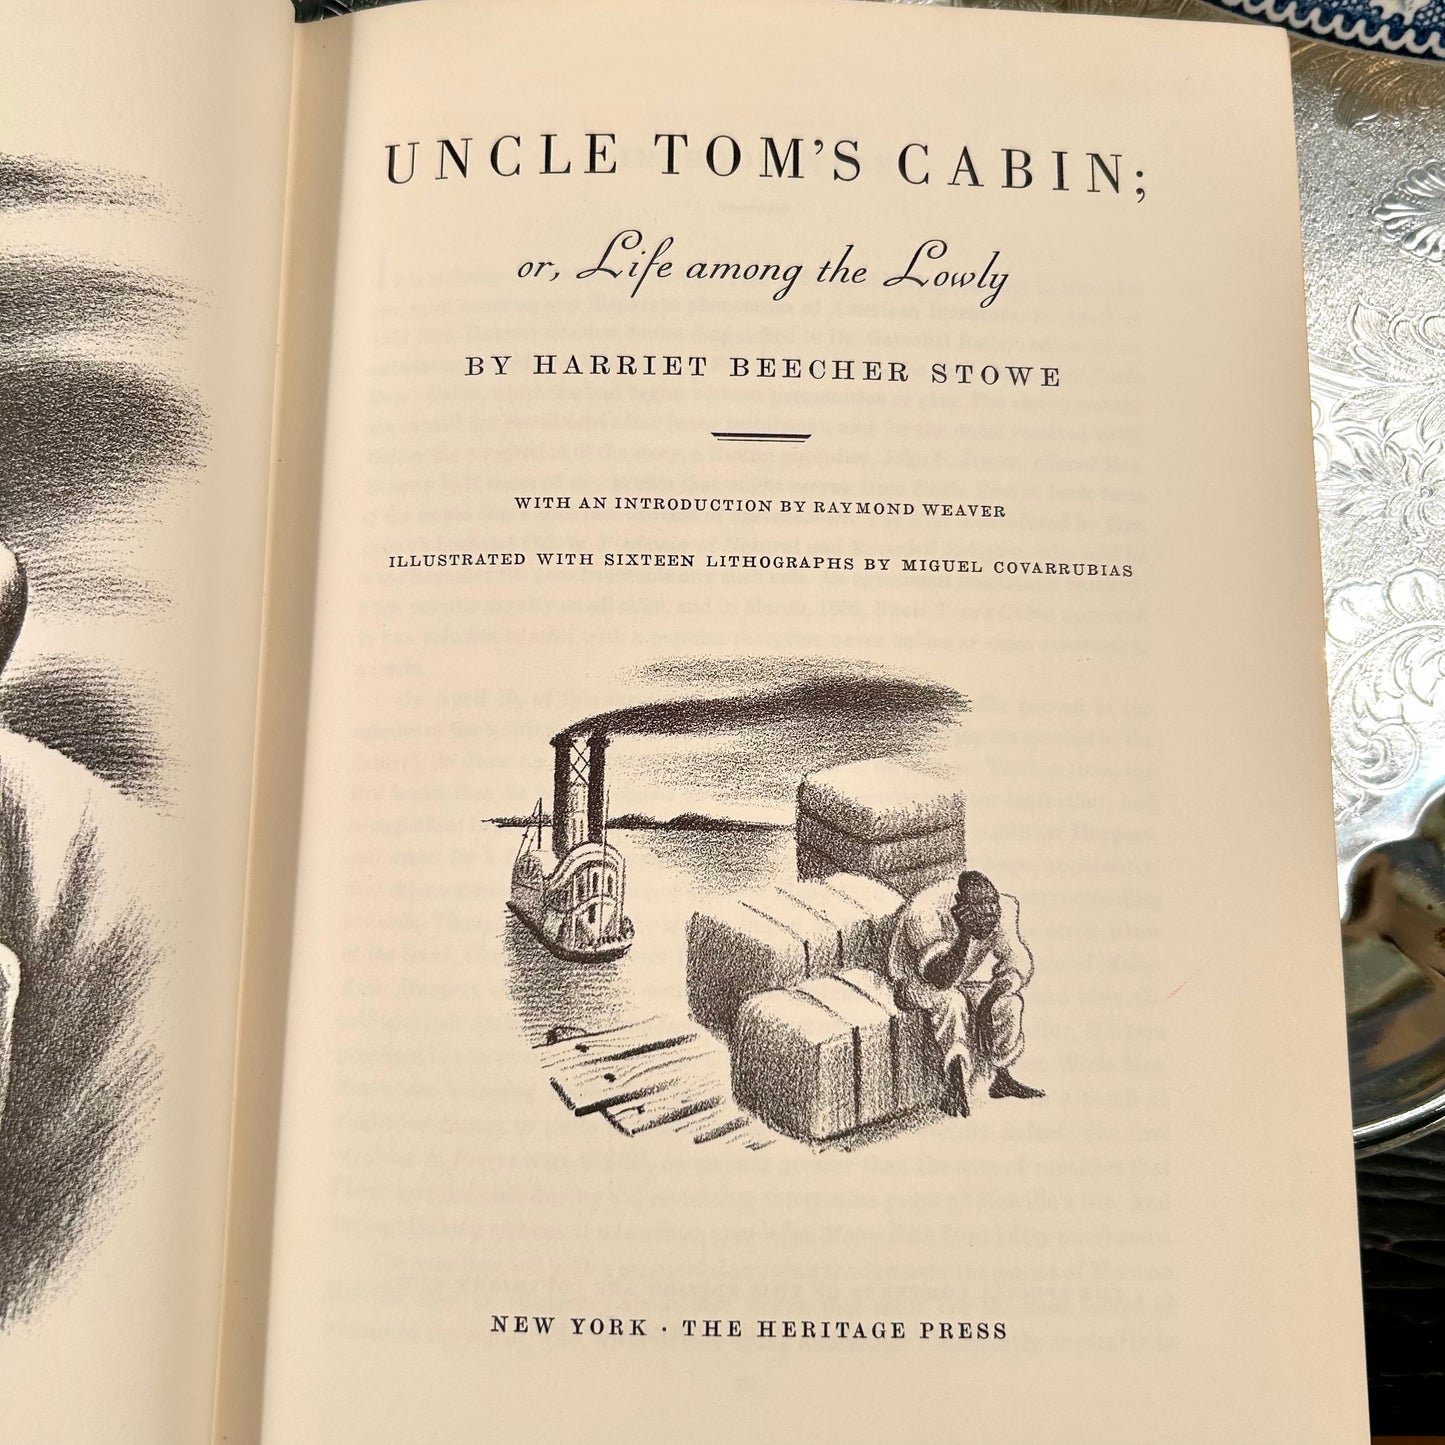 Uncle Tom's Cabin / Life among the lowly by Harriet Beecher Stowe antique hard copy book 
1st Edition 1938